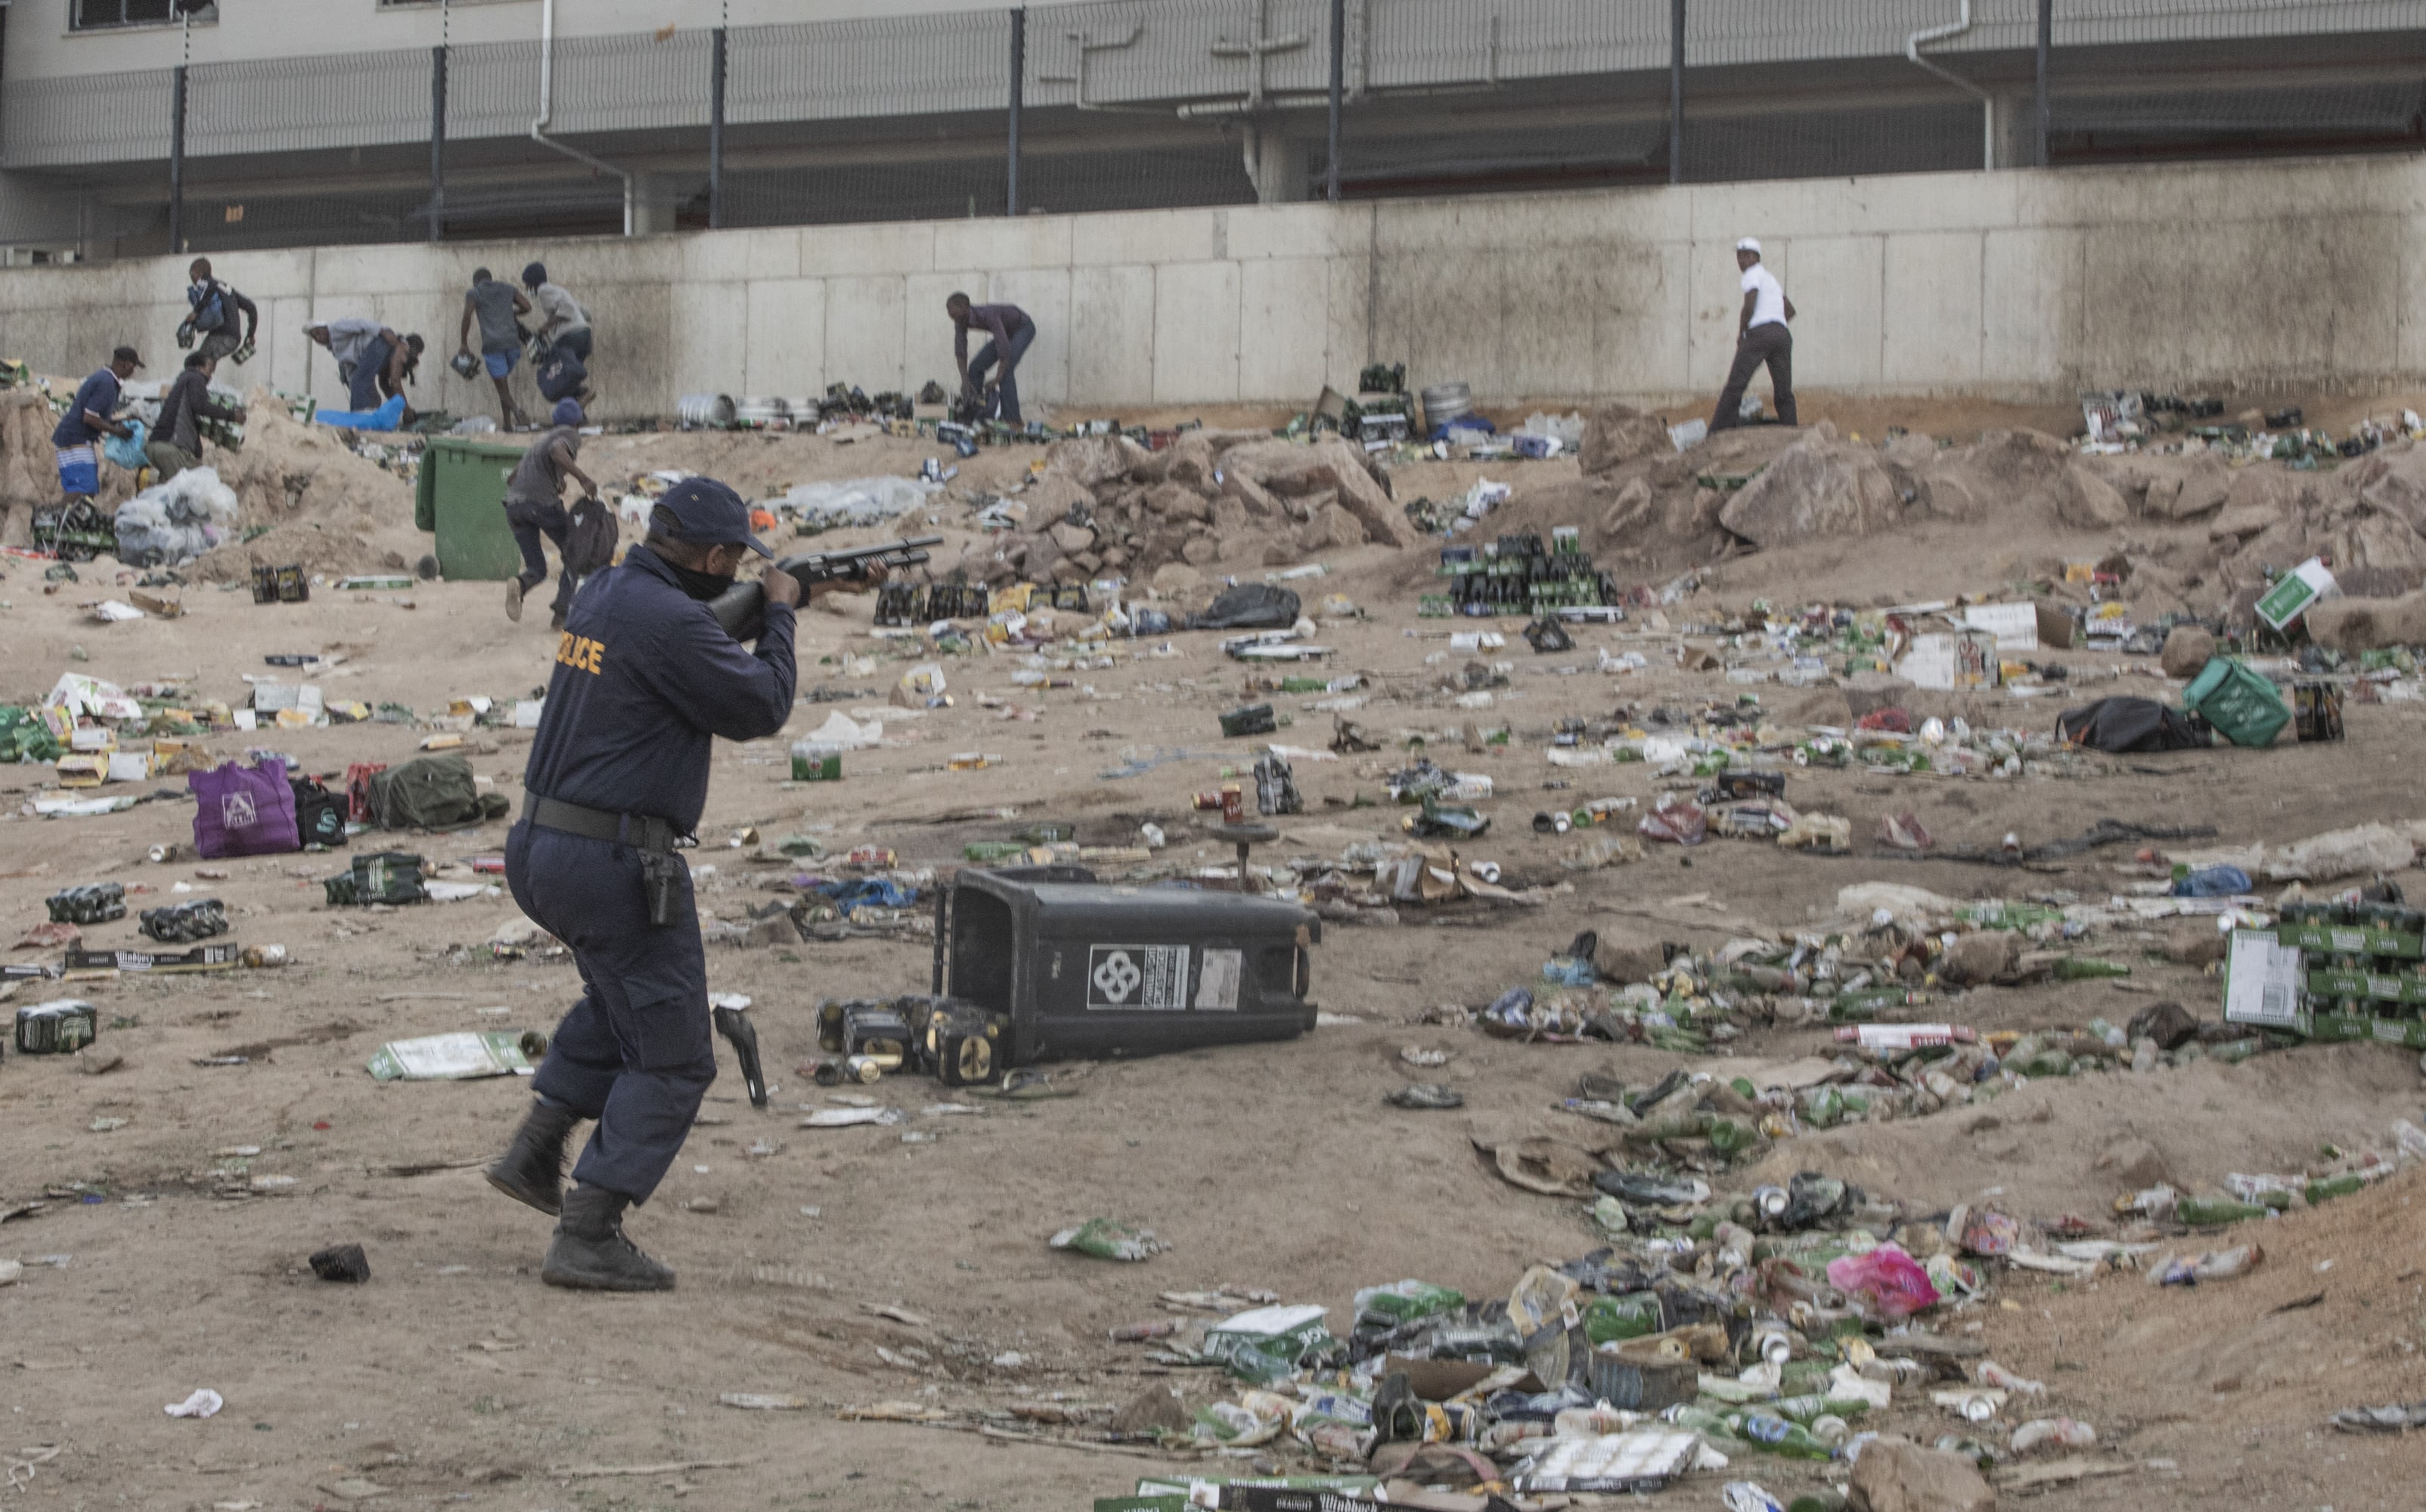 A member of SAPS shoots rubber bullets to disperse a crowd looting outside a warehouse storing alcohol in Durban on July 16, 2021,